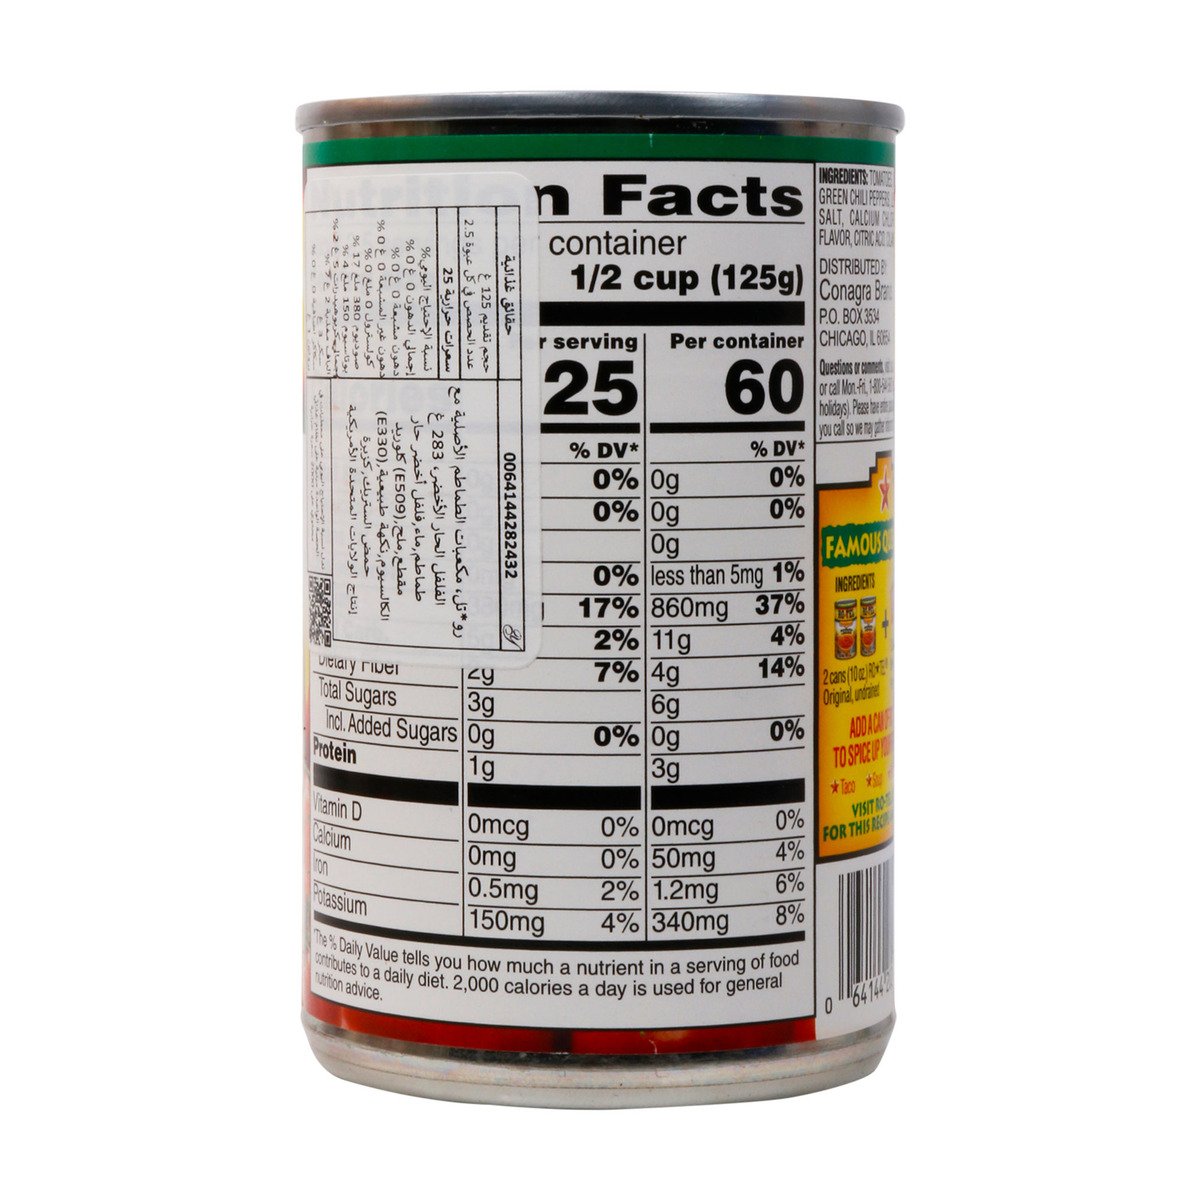 Ro-tel Original Diced Tomatoes And Green Chilies 283g